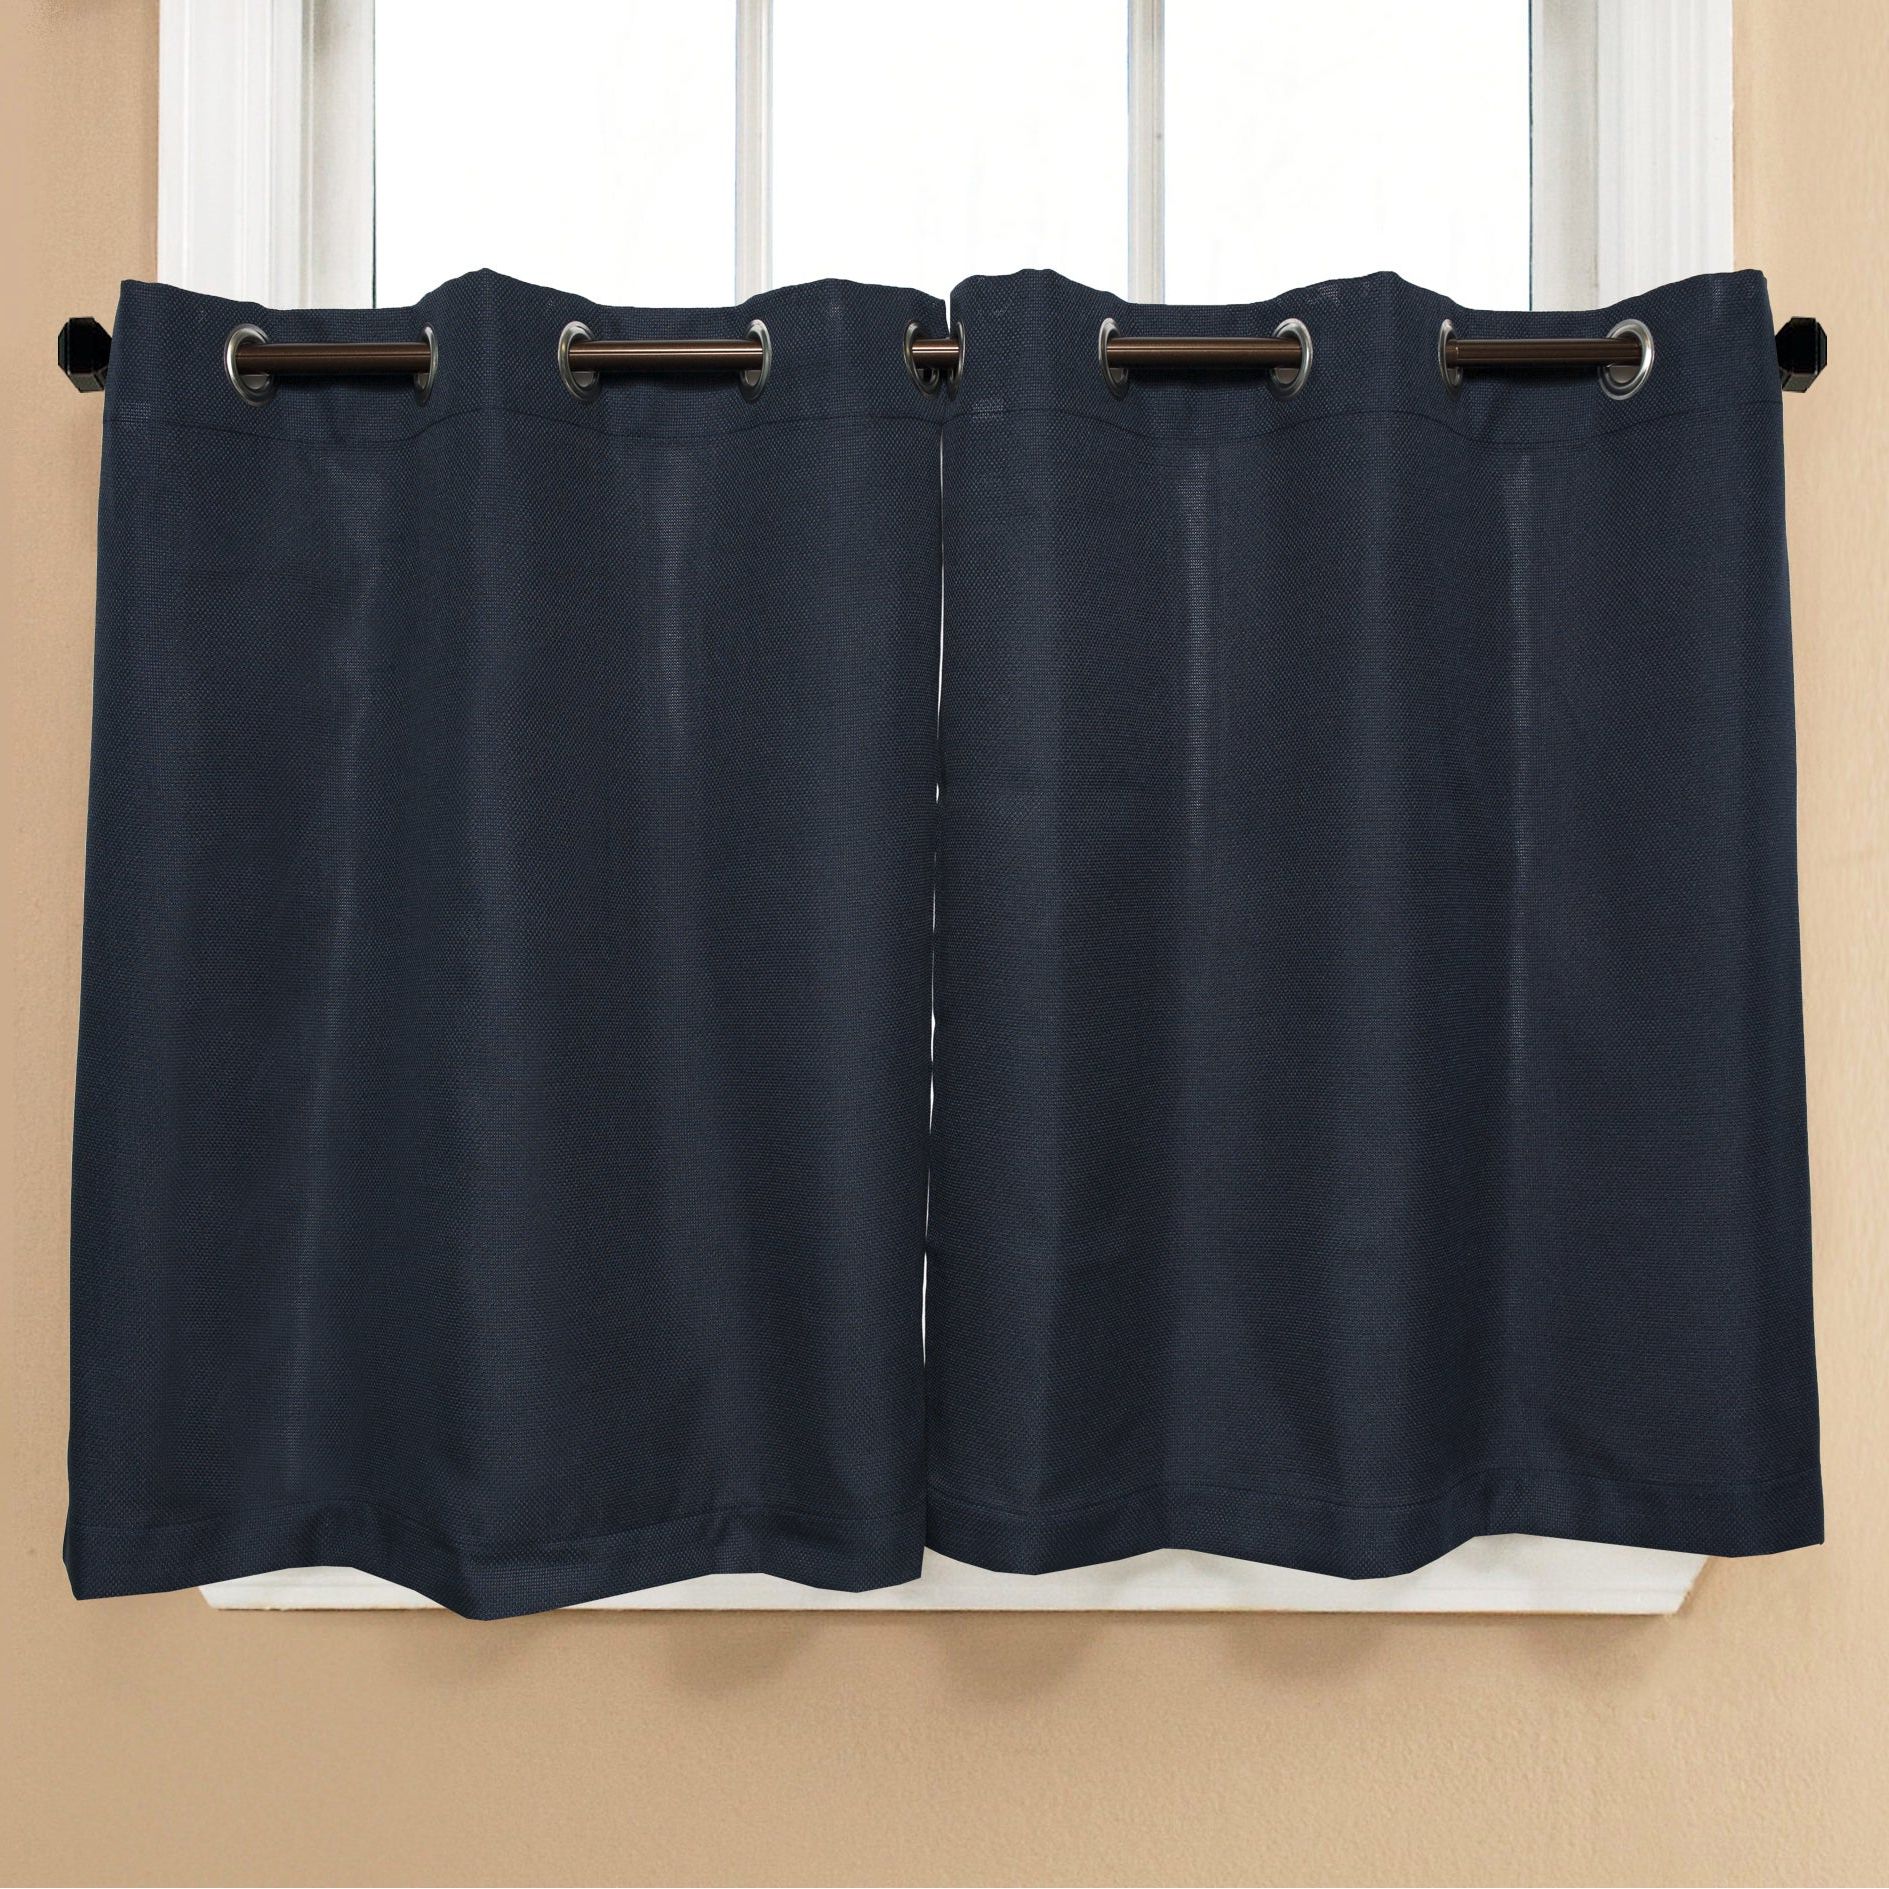 Newest Modern Subtle Texture Solid Red Kitchen Curtains With Regard To Modern Subtle Texture Solid Navy Kitchen Curtain Parts With Grommets  Tier  And Valance Options (View 8 of 20)